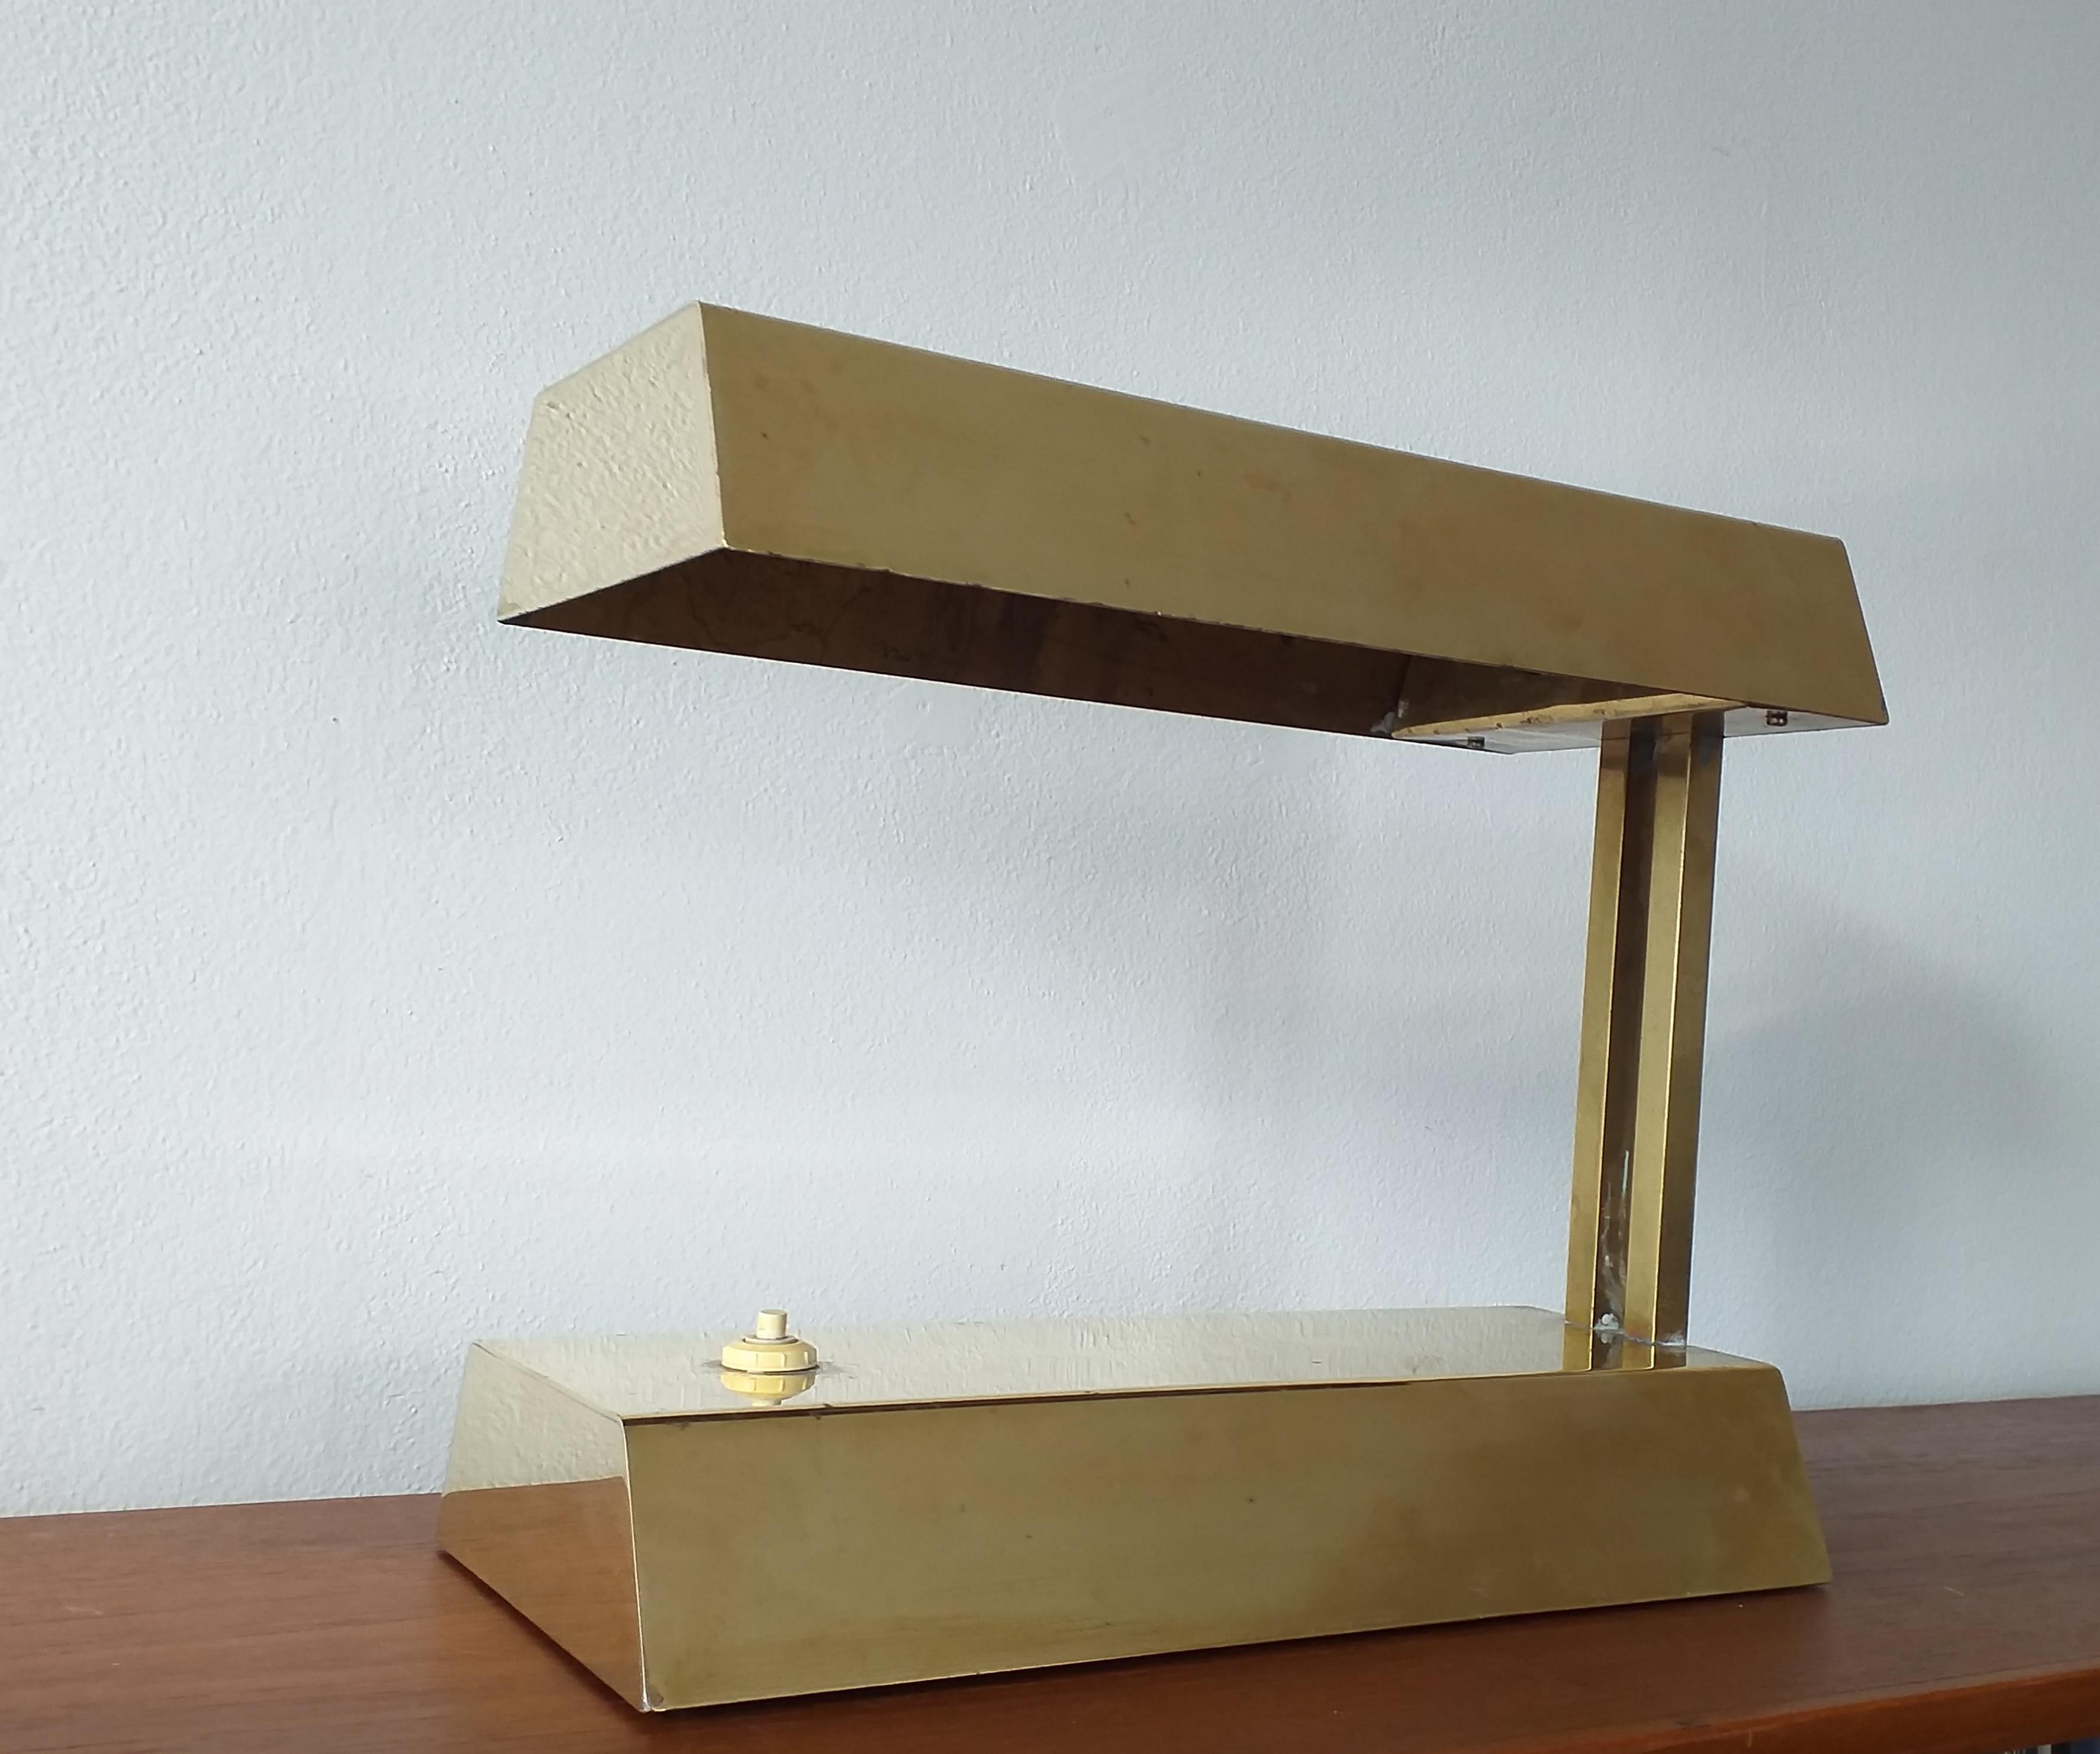 - In style of Marcel Breuer / Bauhaus style
- Very rare model
- Nice style of lighting.